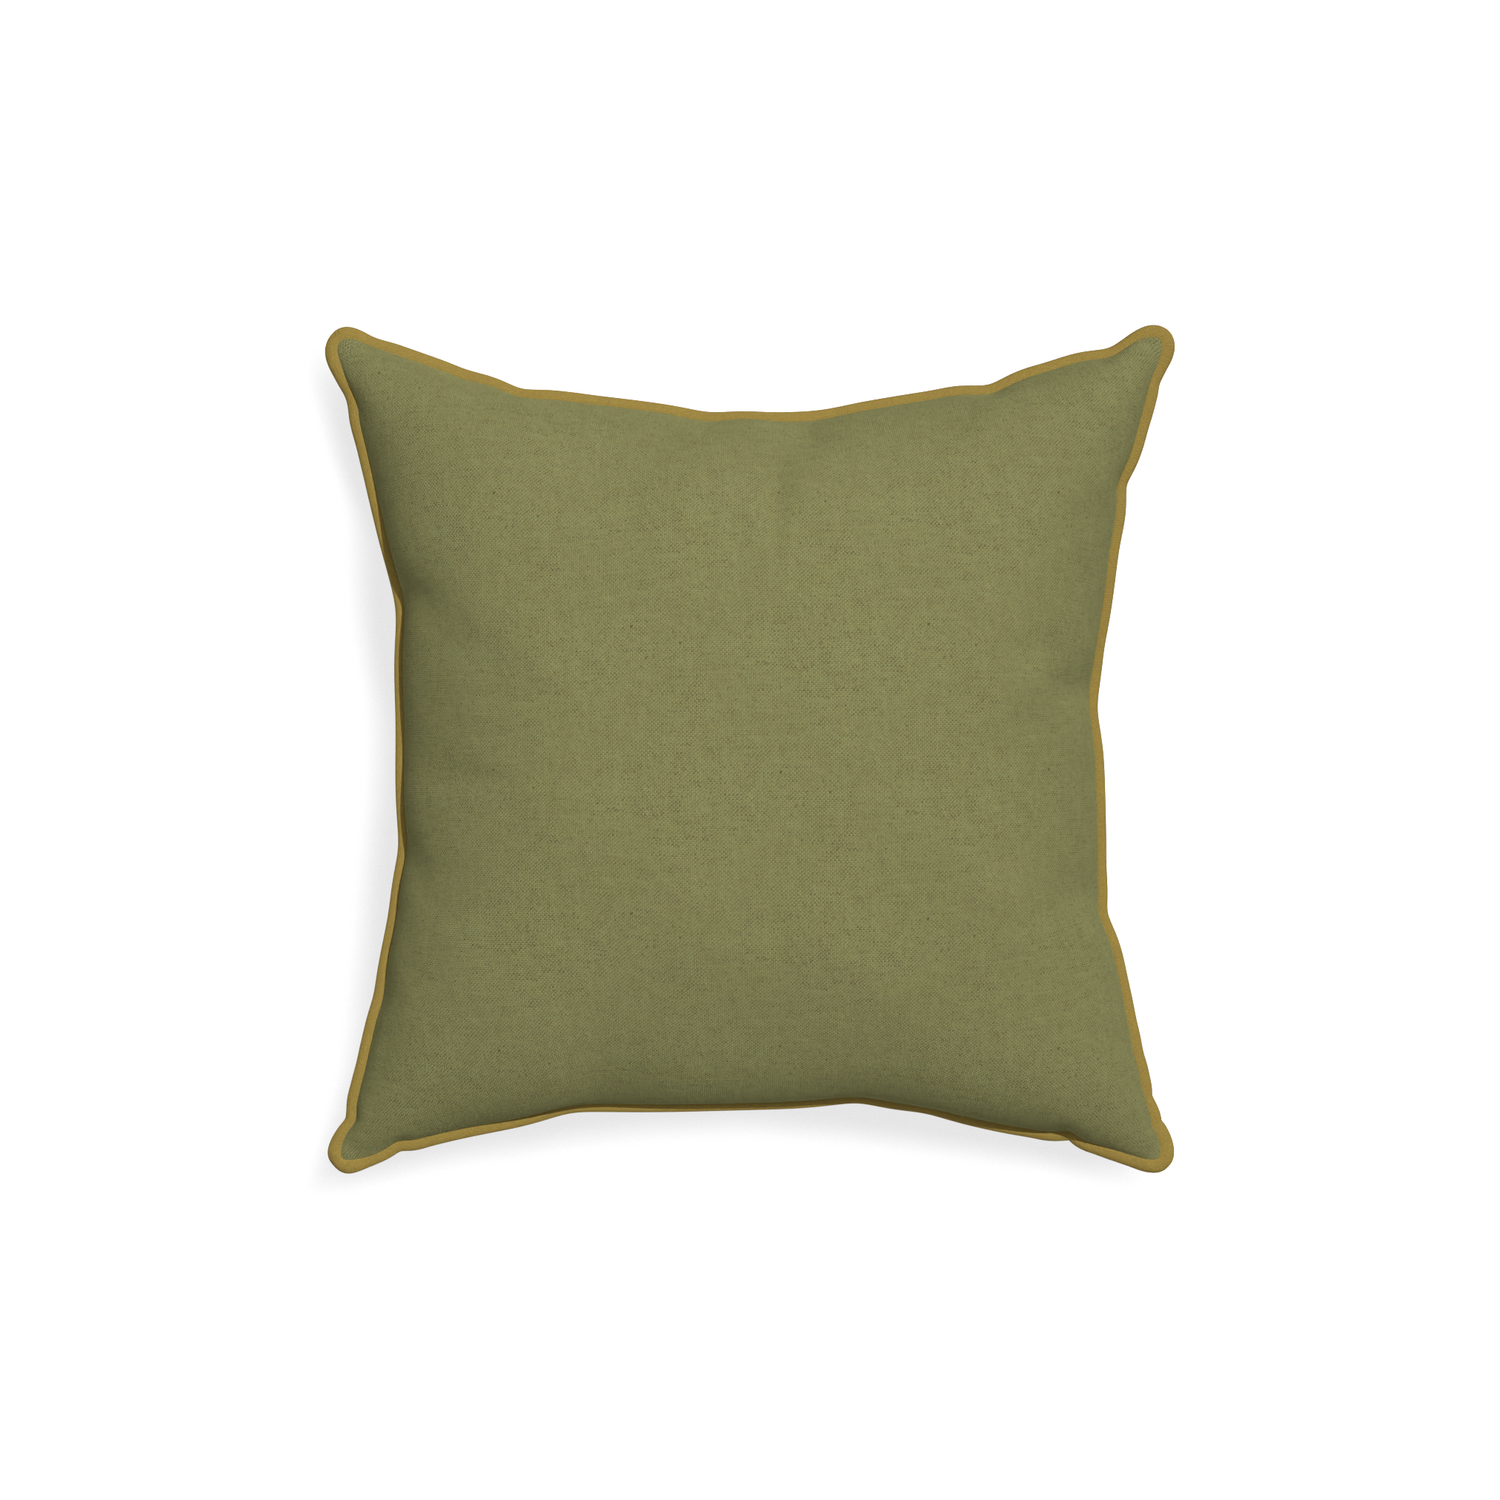 18-square moss custom moss greenpillow with c piping on white background